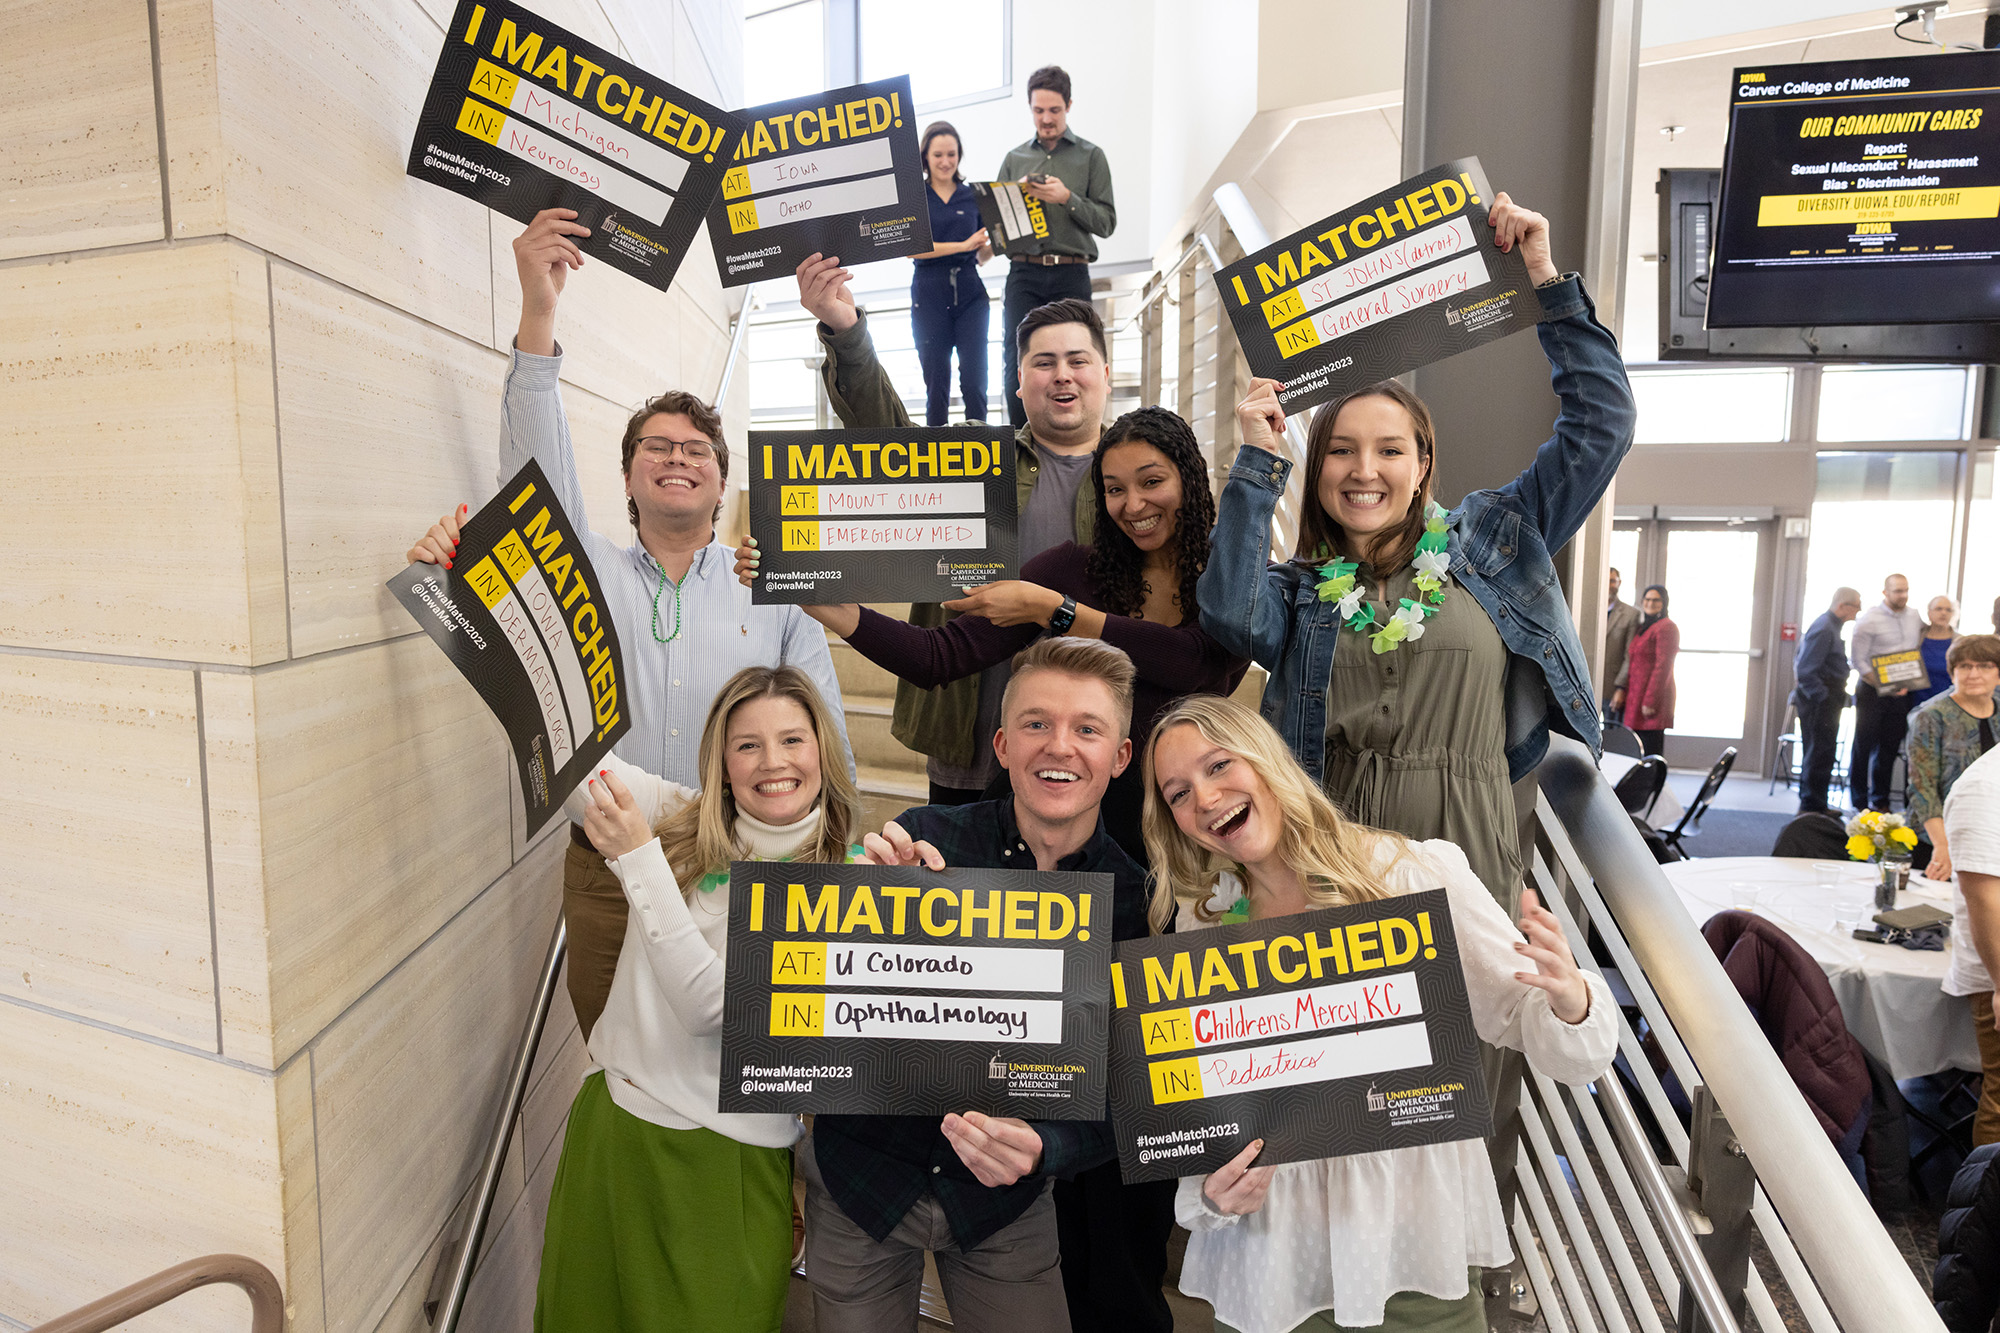 University of Iowa Carver College of Medicine students holding signs during Match Day 2023